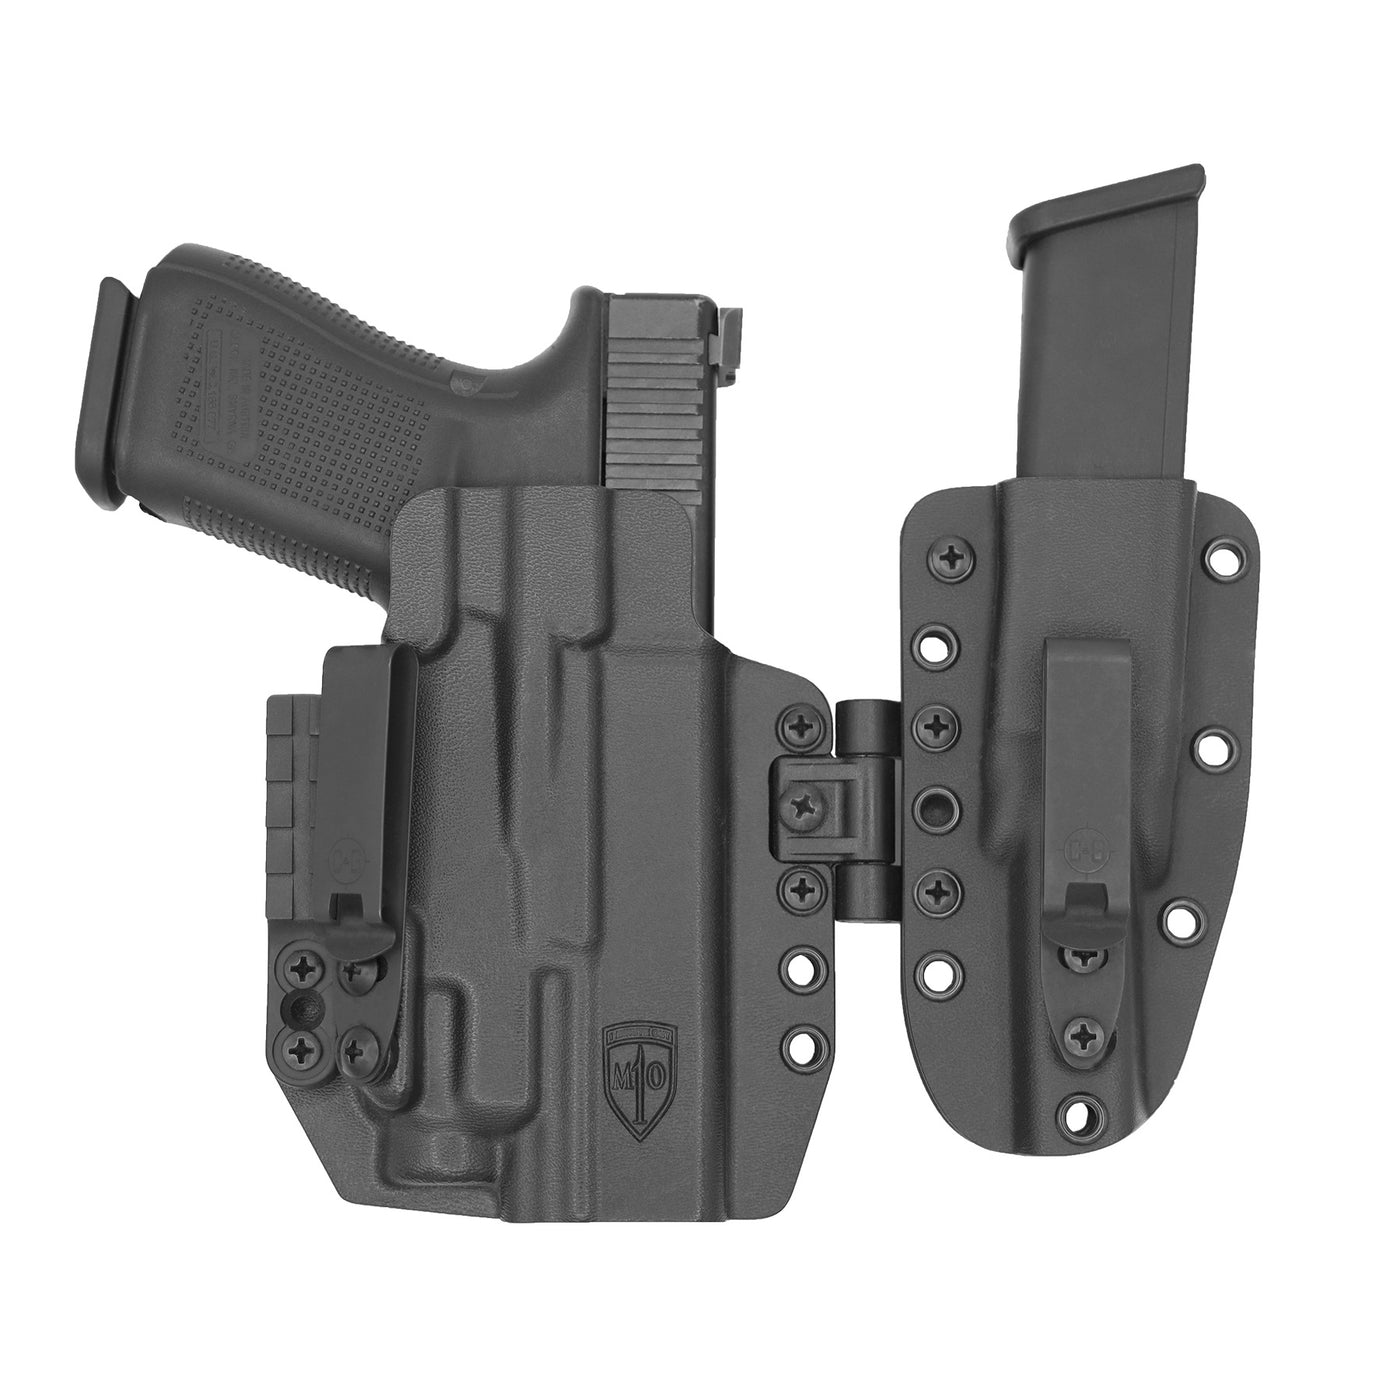 This is the 1 Minute Out and C&G Holsters MOD1 Modular Holster system (Sidecar), for a Glock 17 and 19 showing a front view with gun and mag holstered